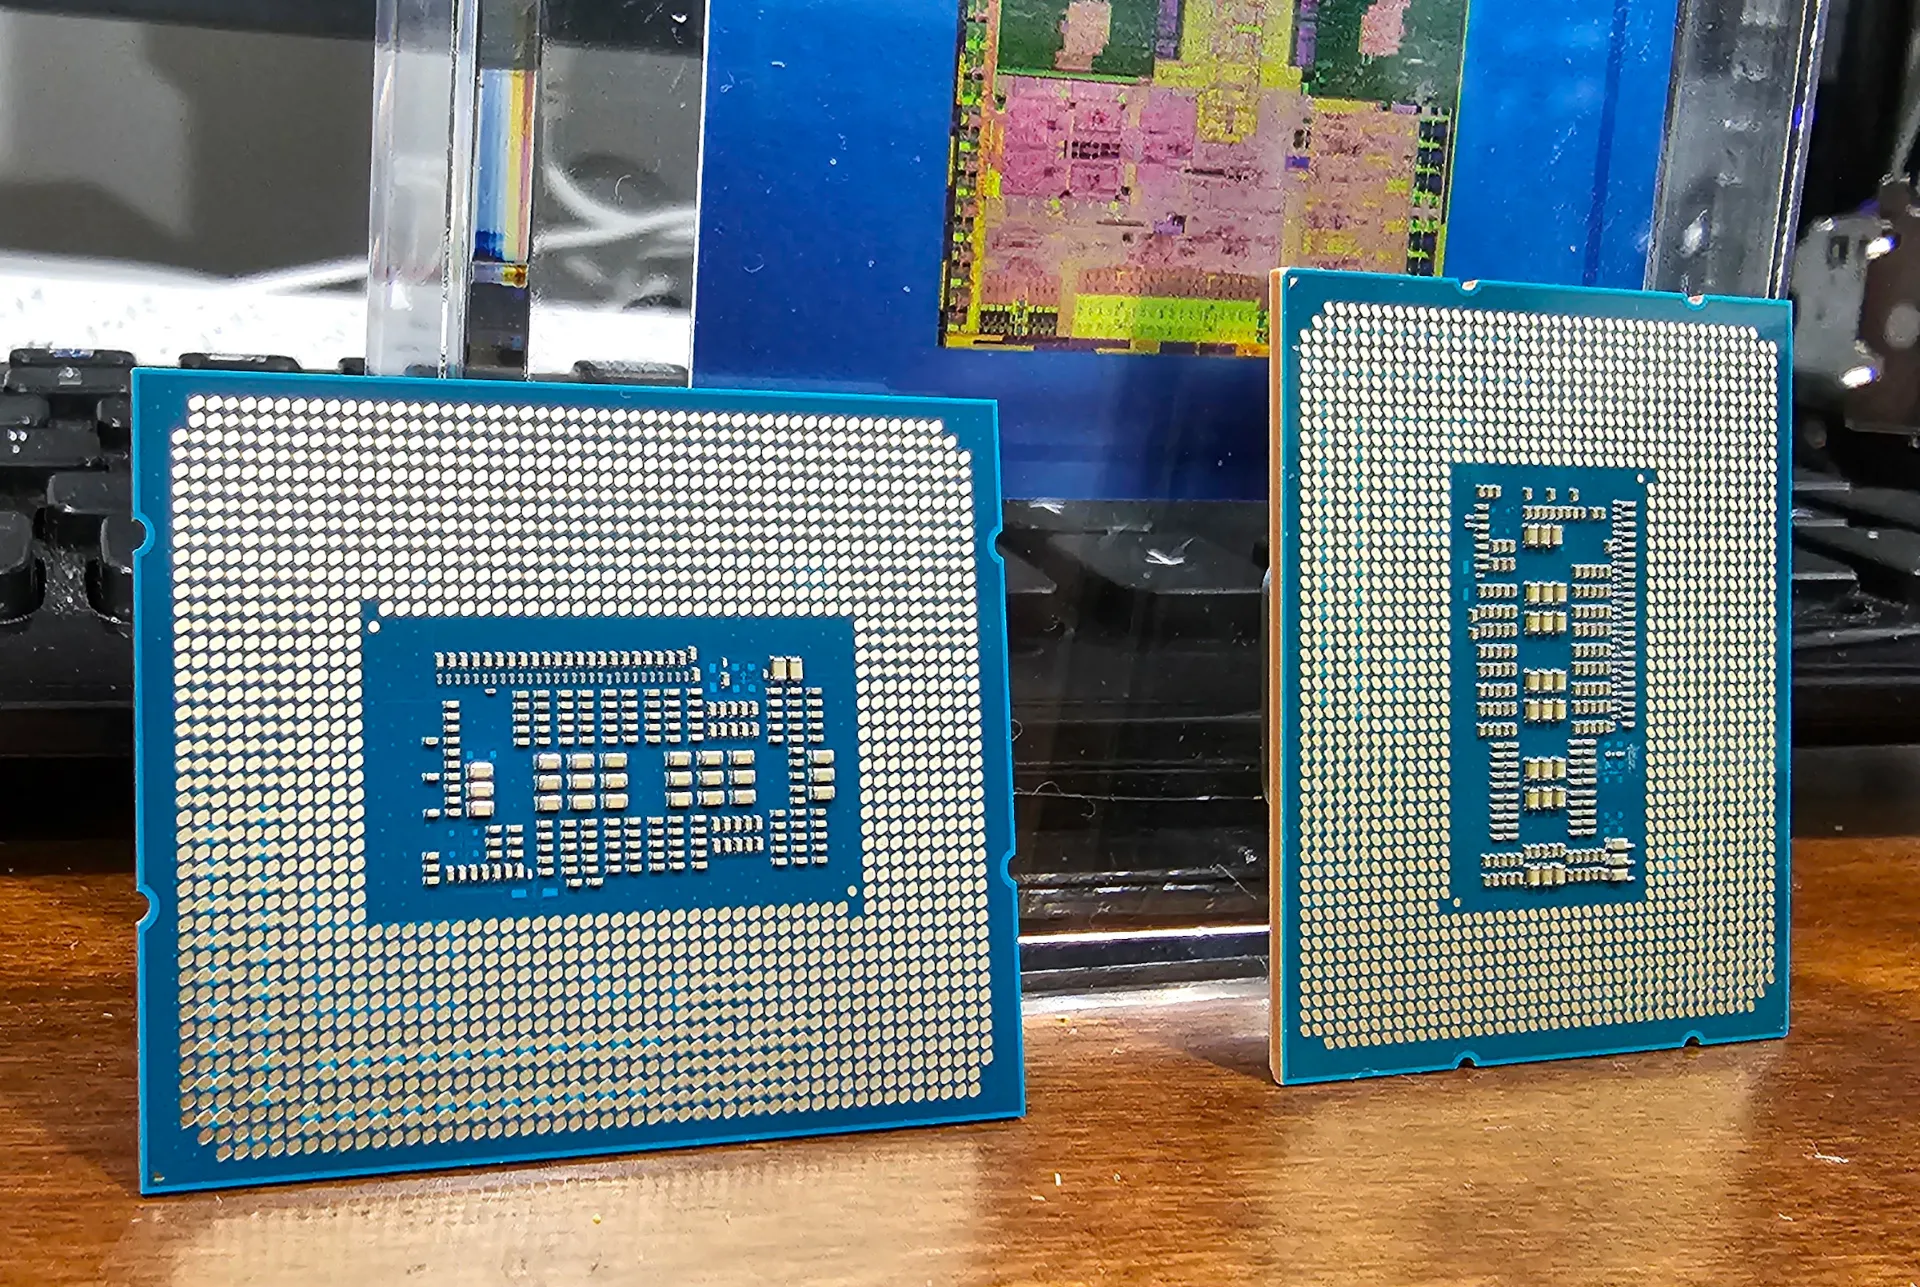 Intel Releases Updated CPU Microcode For Fixing Three New Security Issues